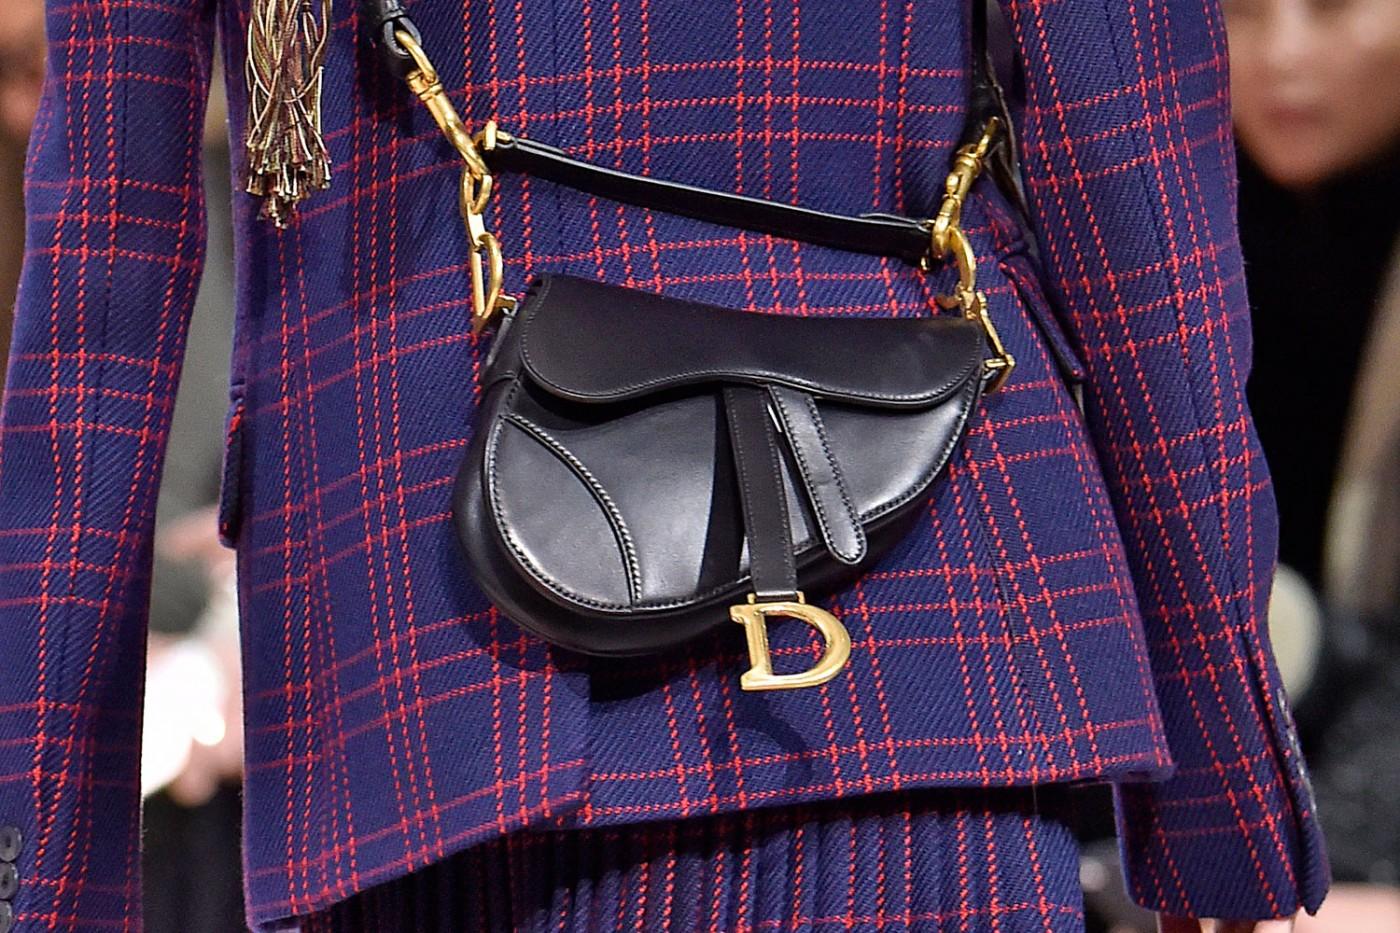 Dior's Iconic Saddle Bag Fashion Inspiration & Bags of Style | Cool